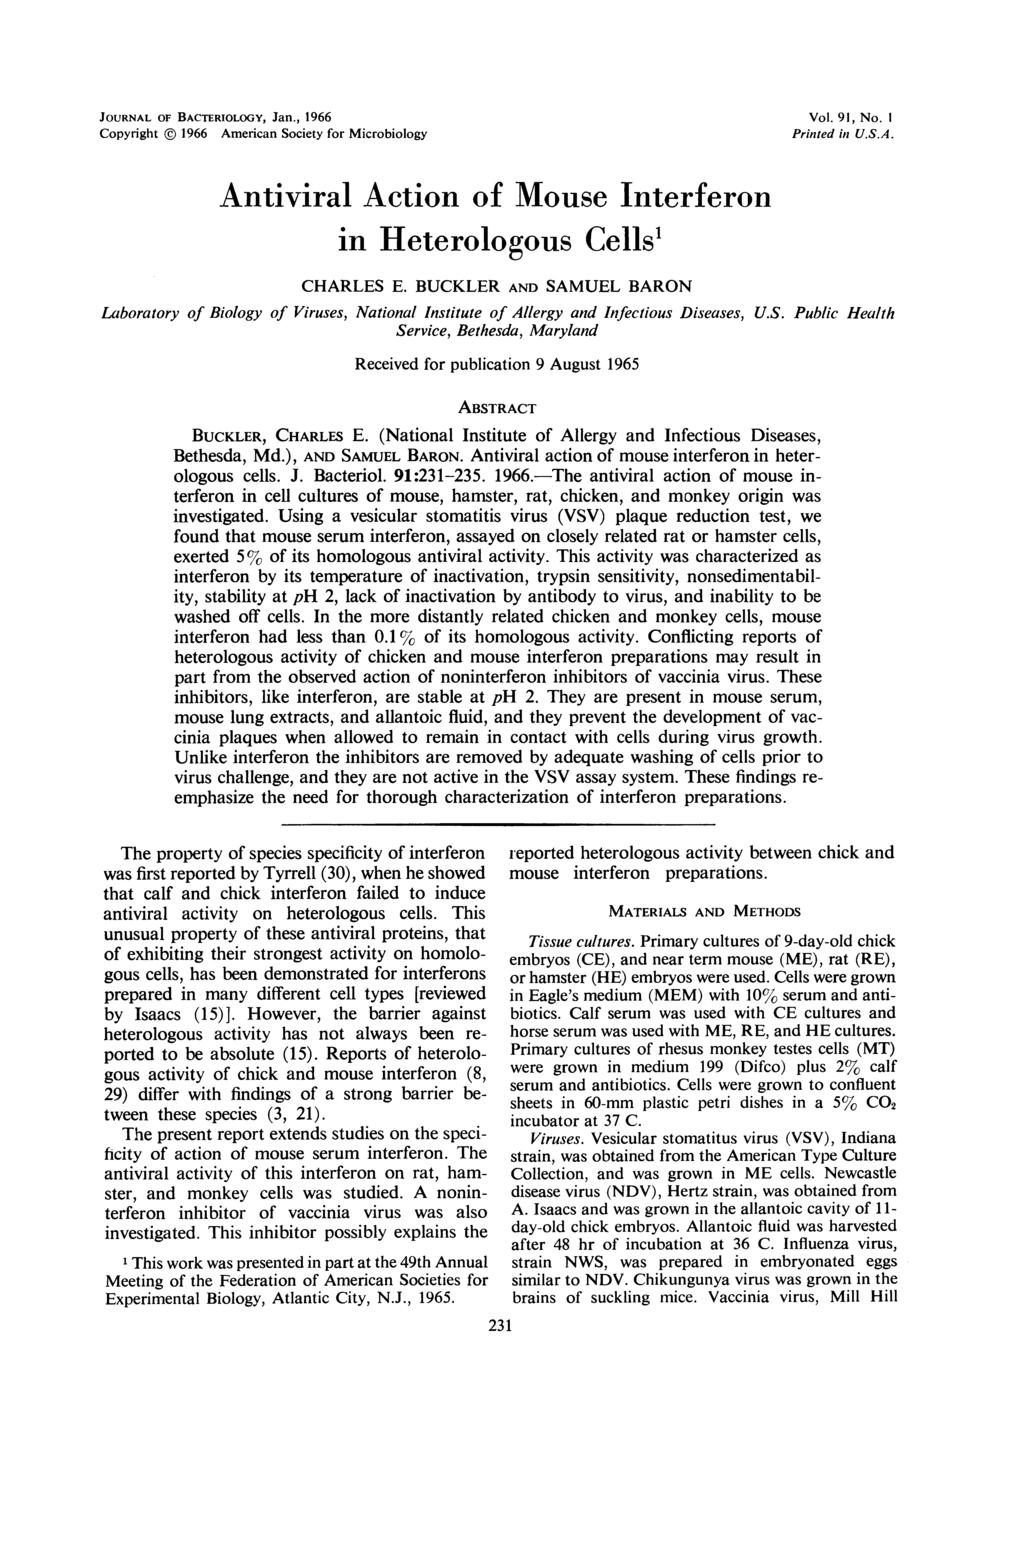 JOURNAL OF BACTERIOLOGY, Jan., 1966 Copyright 1966 American Society for Microbiology Vol. 91, No. I Printed in U.S.A. Antiviral Action of Mouse Interferon in Heterologous Cells1 CHARLES E.